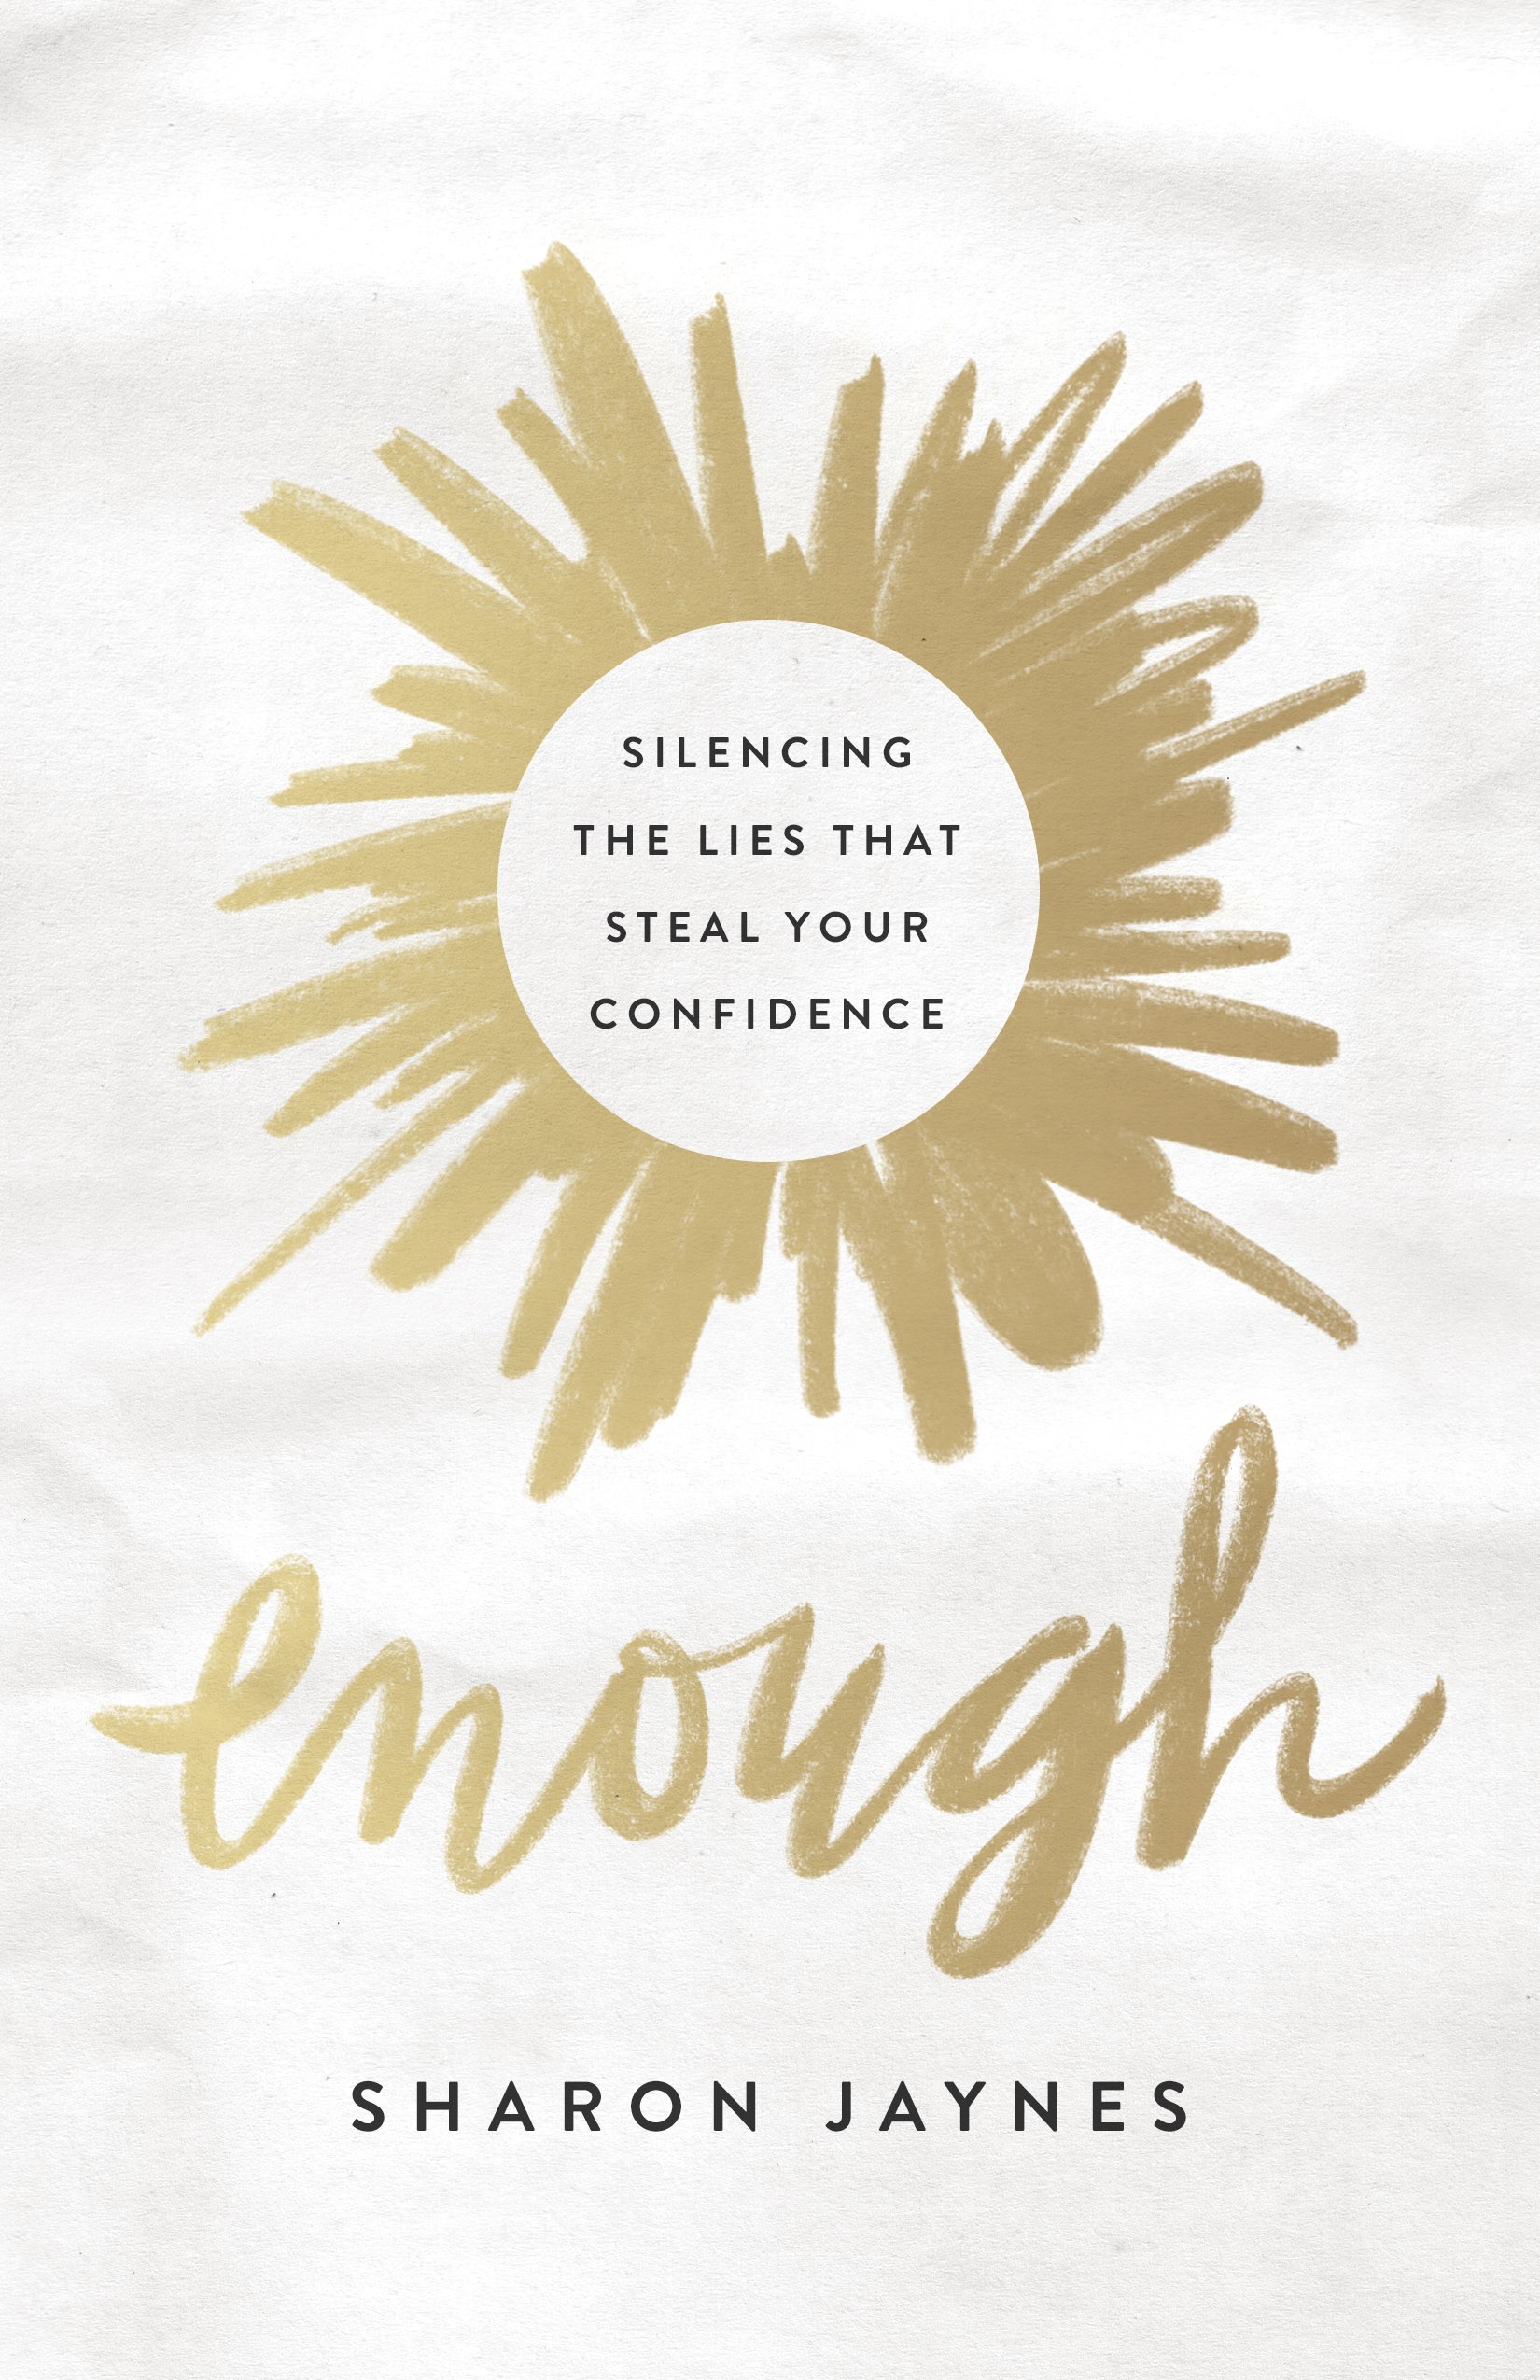 Enough by Sharon Jaynes